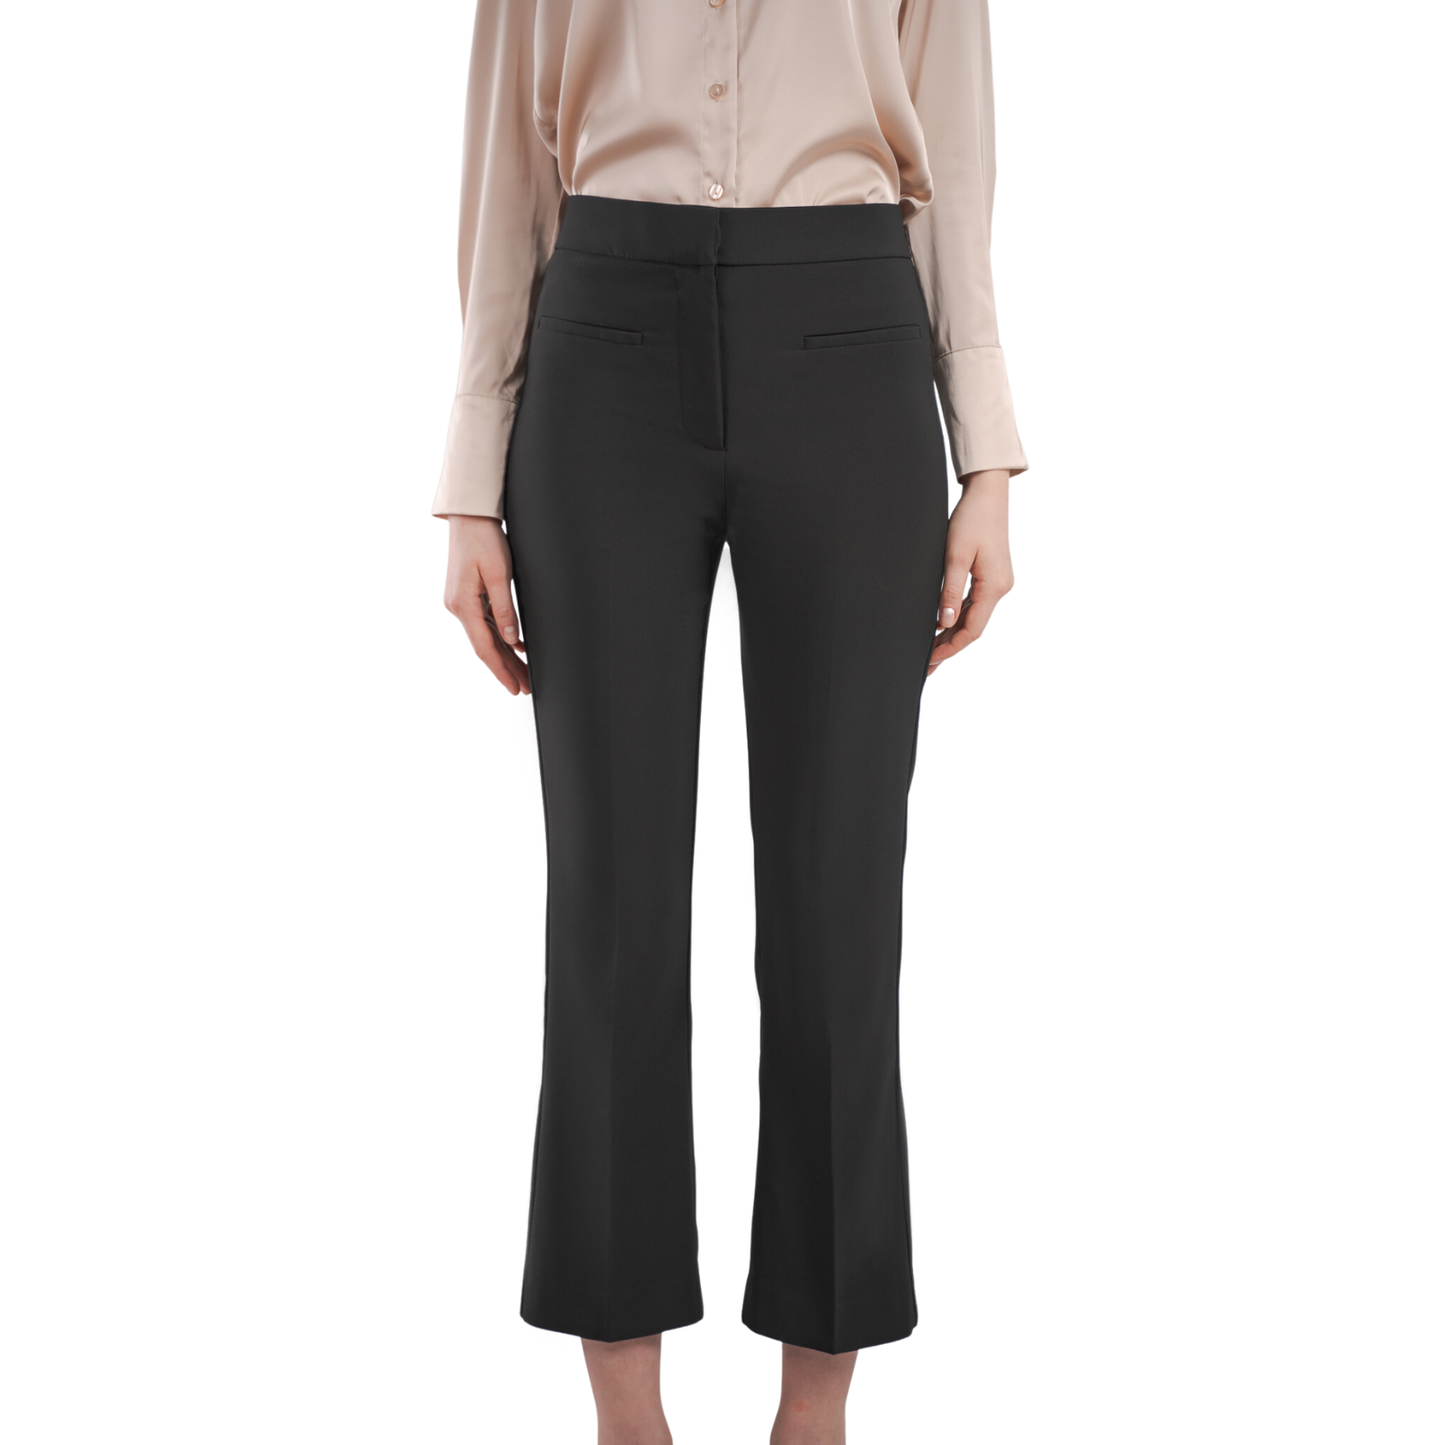 Women's Business Pants | 100% Made to measure - Sumissura